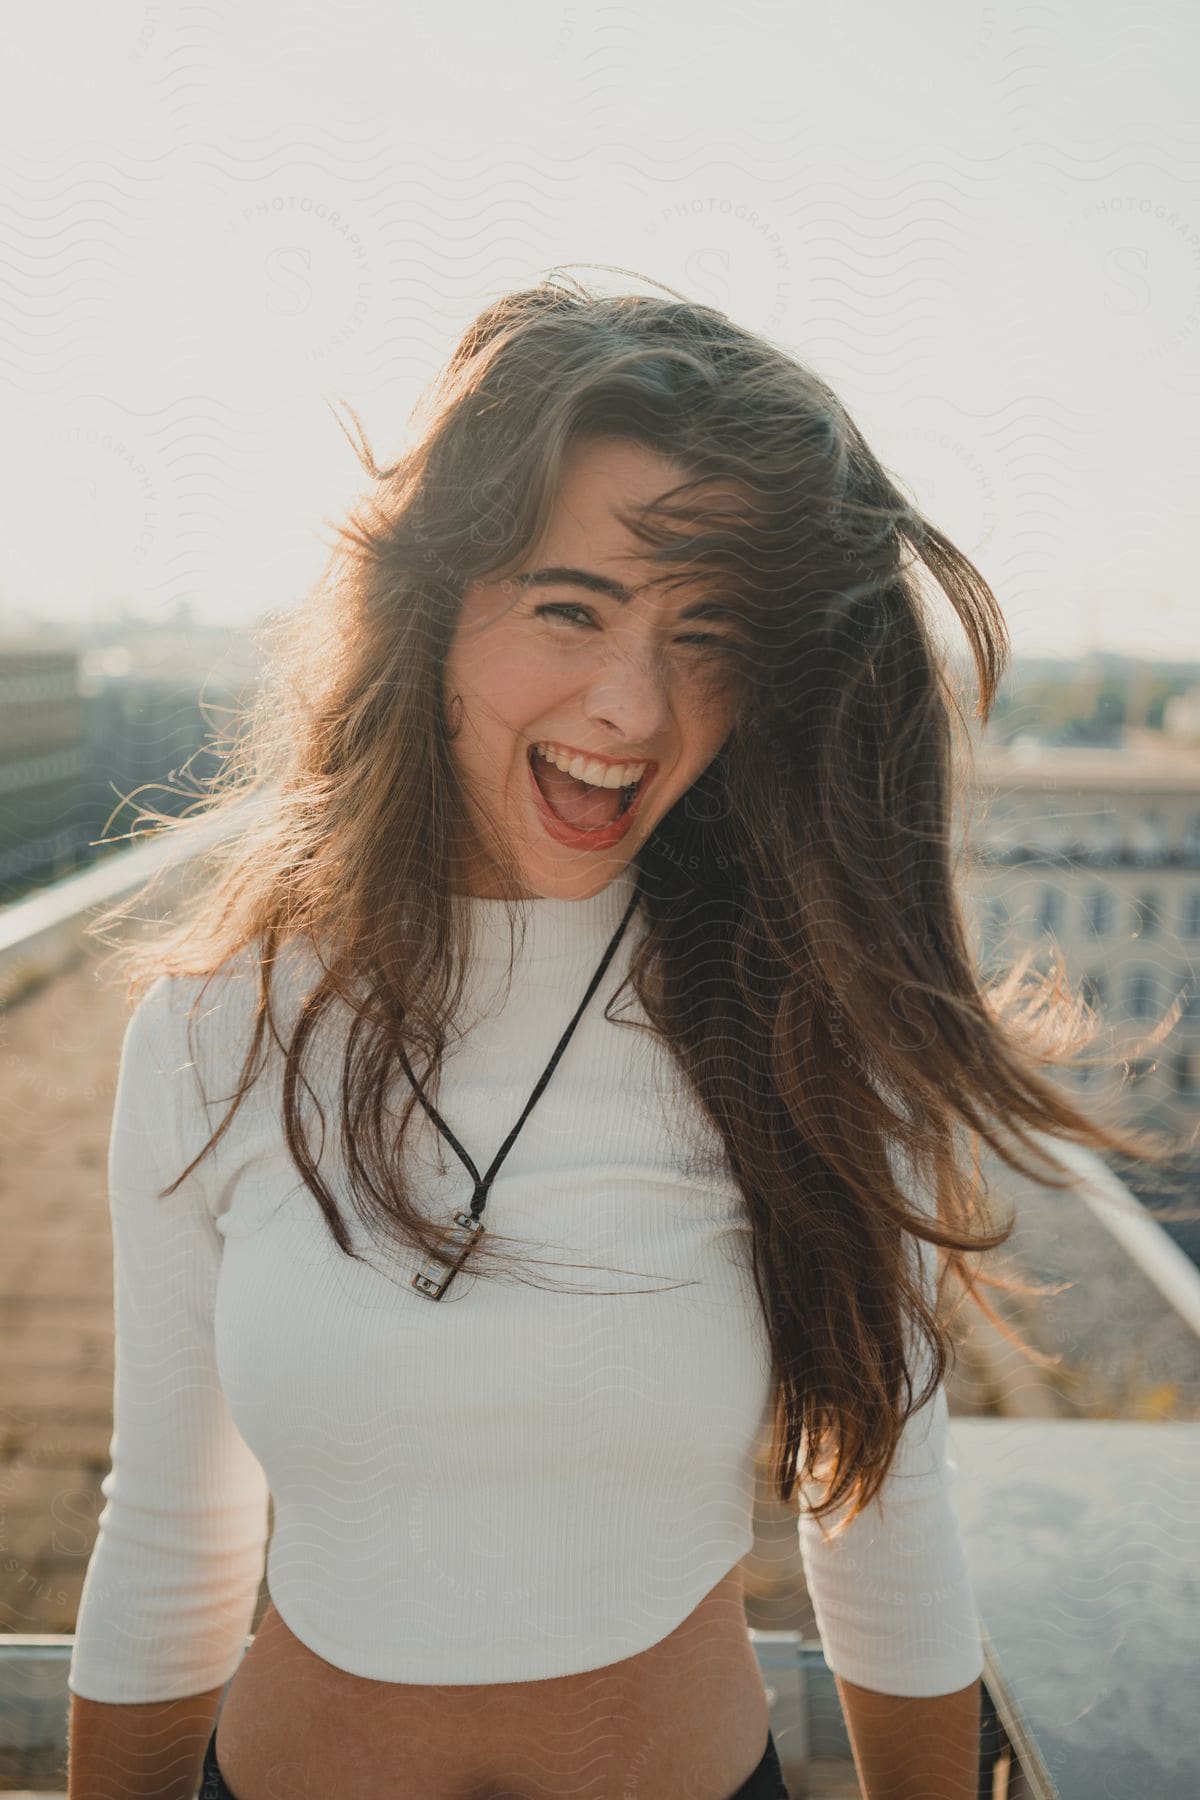 Woman with long hair laughing on a sunny rooftop, wearing a white top and a necklace.